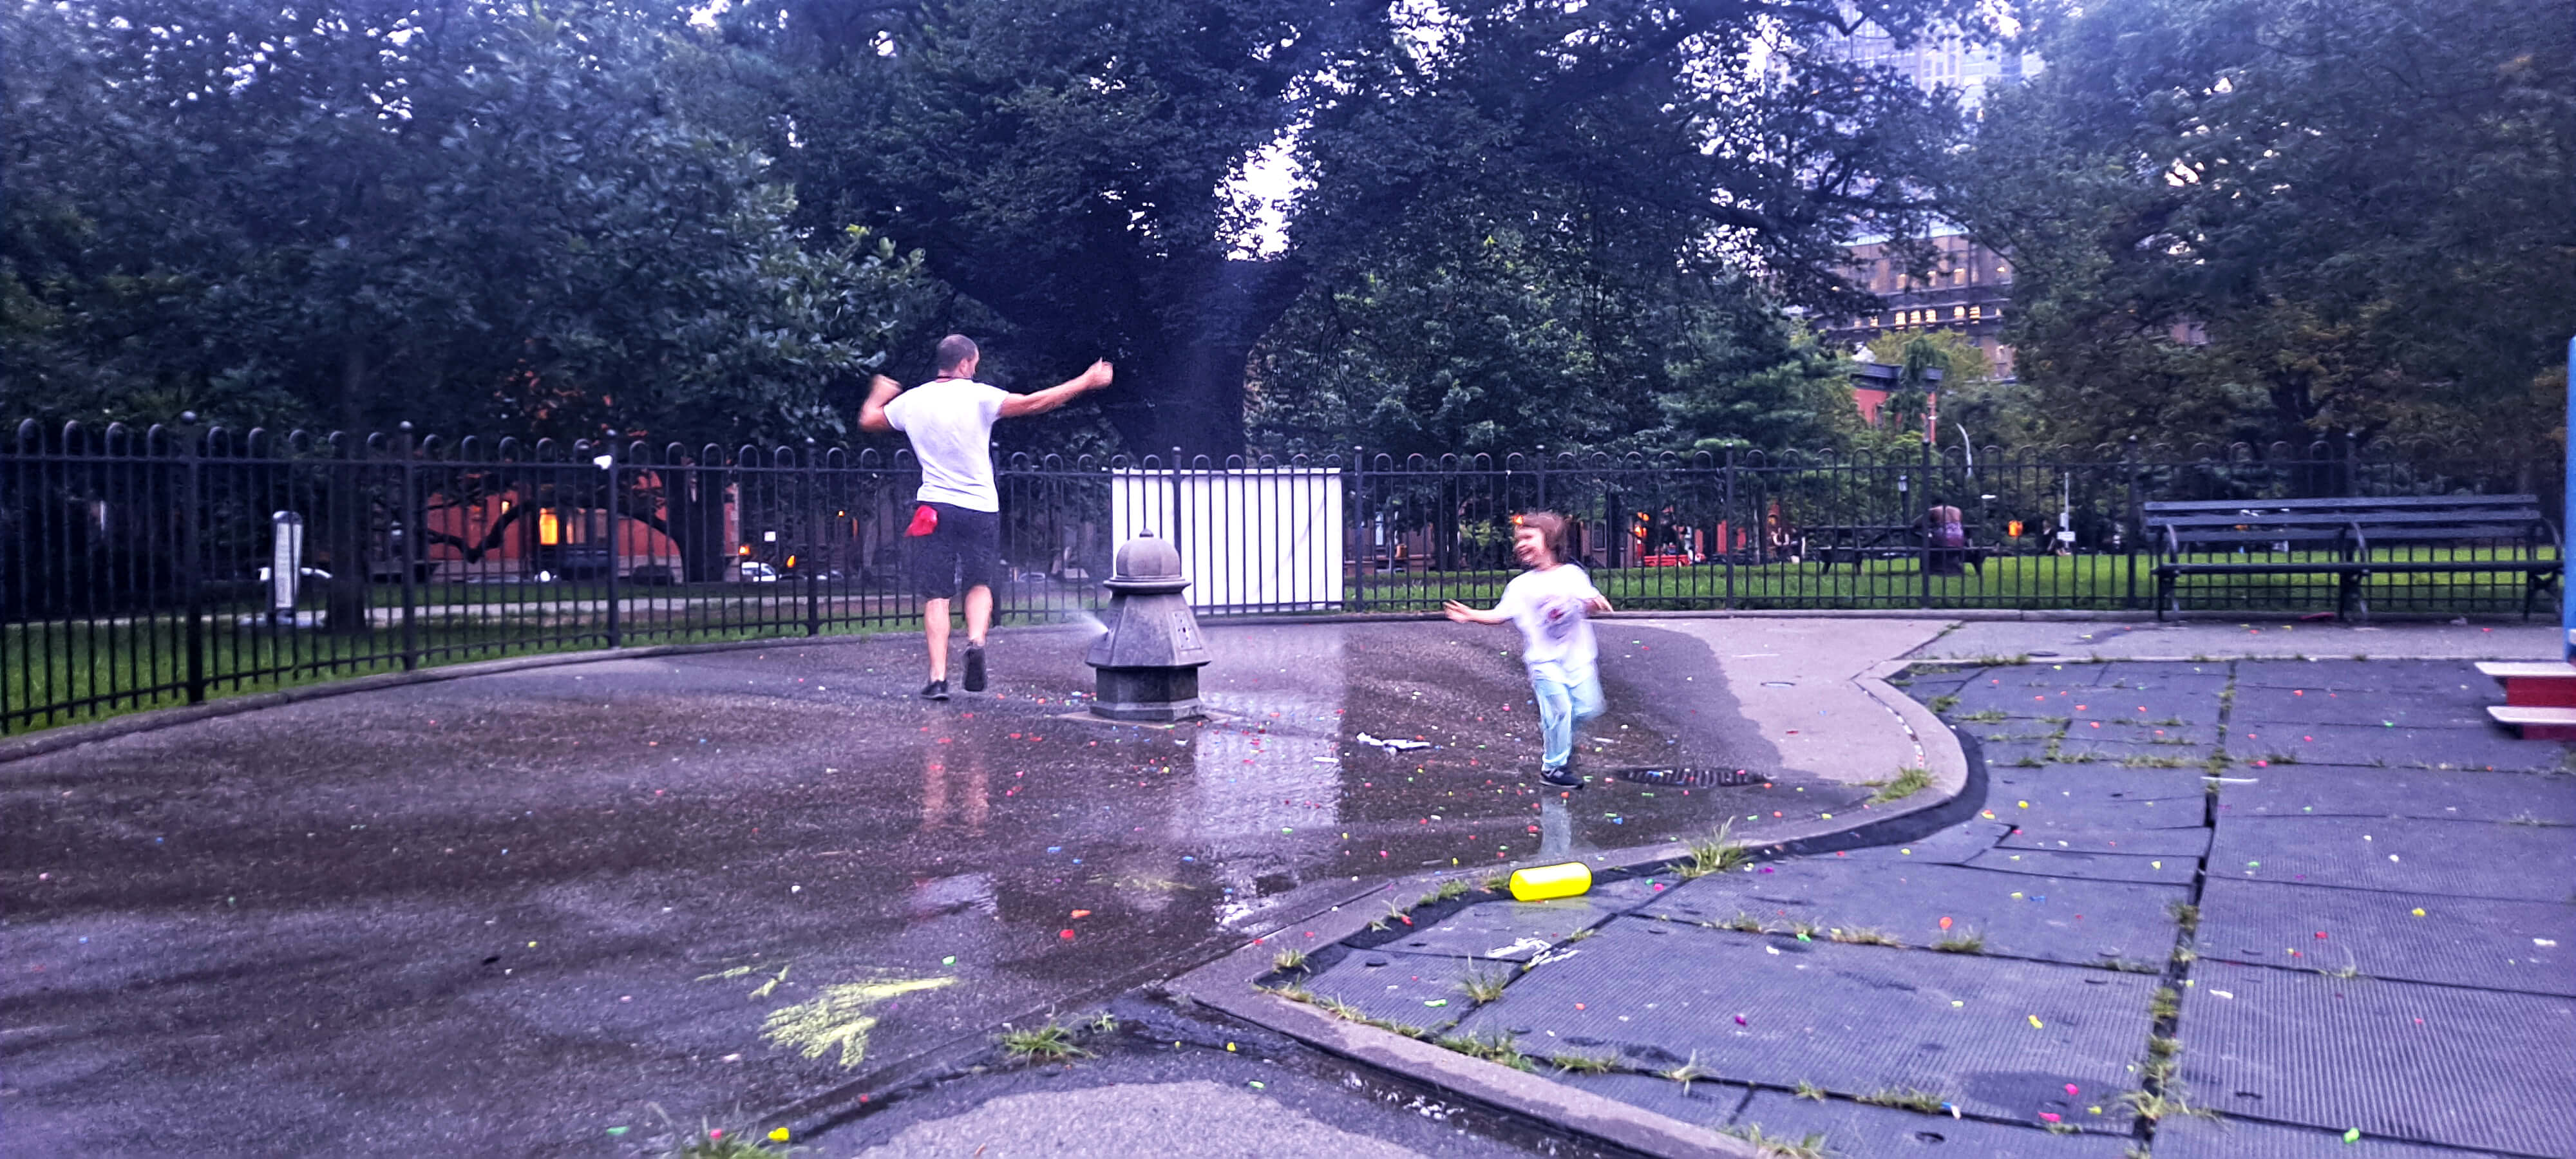 A photo of Alexander Khost and one of his daughter's dancing around a park sprinkler